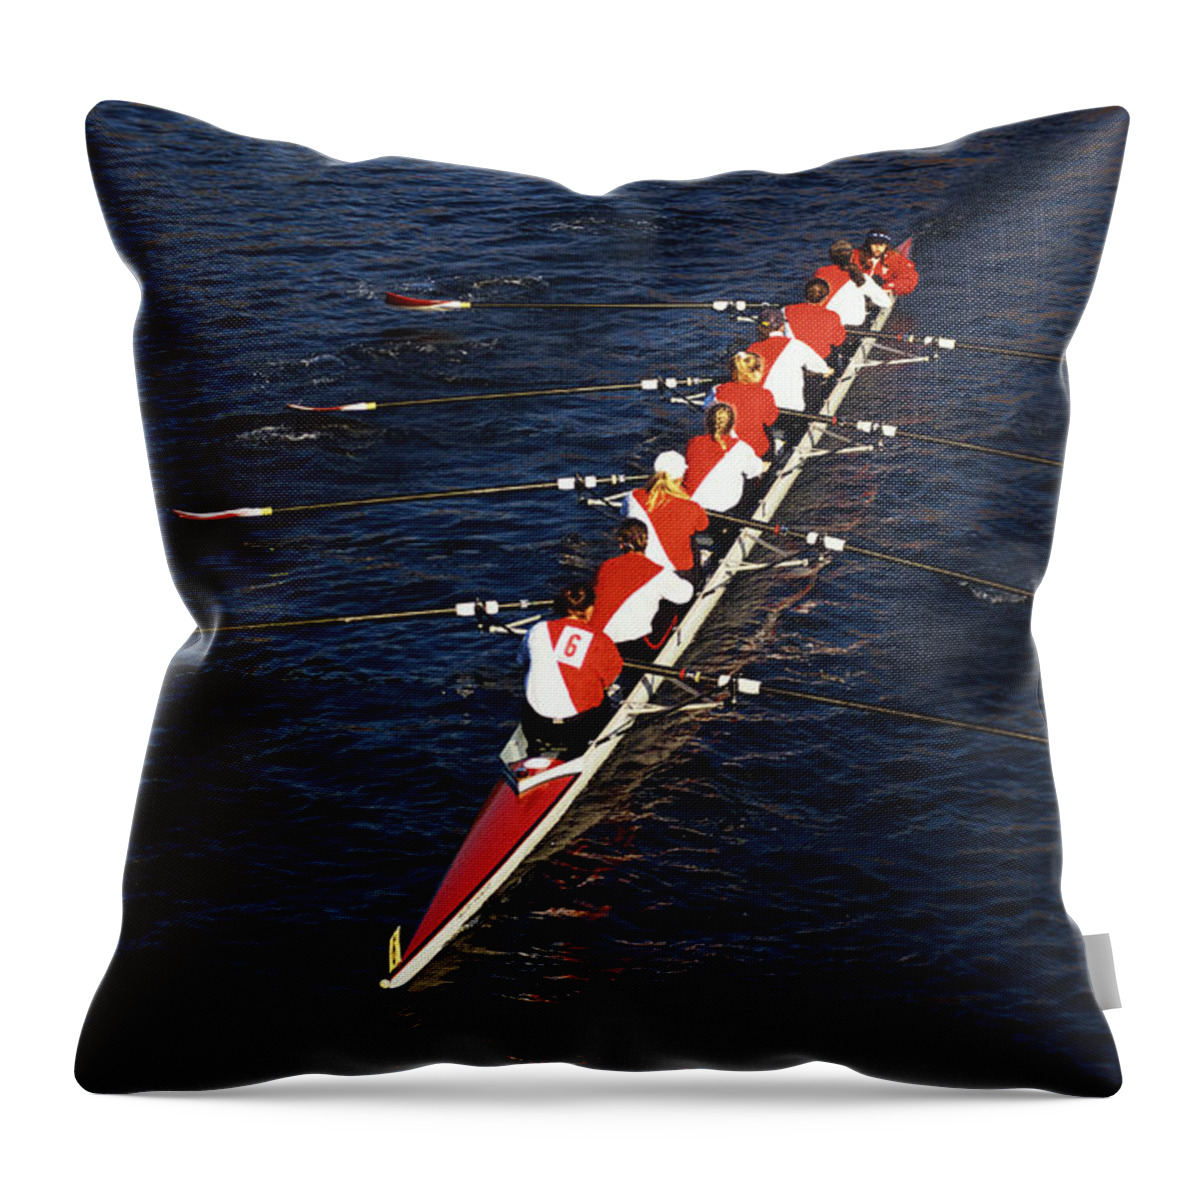 Photography Throw Pillow featuring the photograph Crew Boat At Head Of Charles Regatta by Panoramic Images